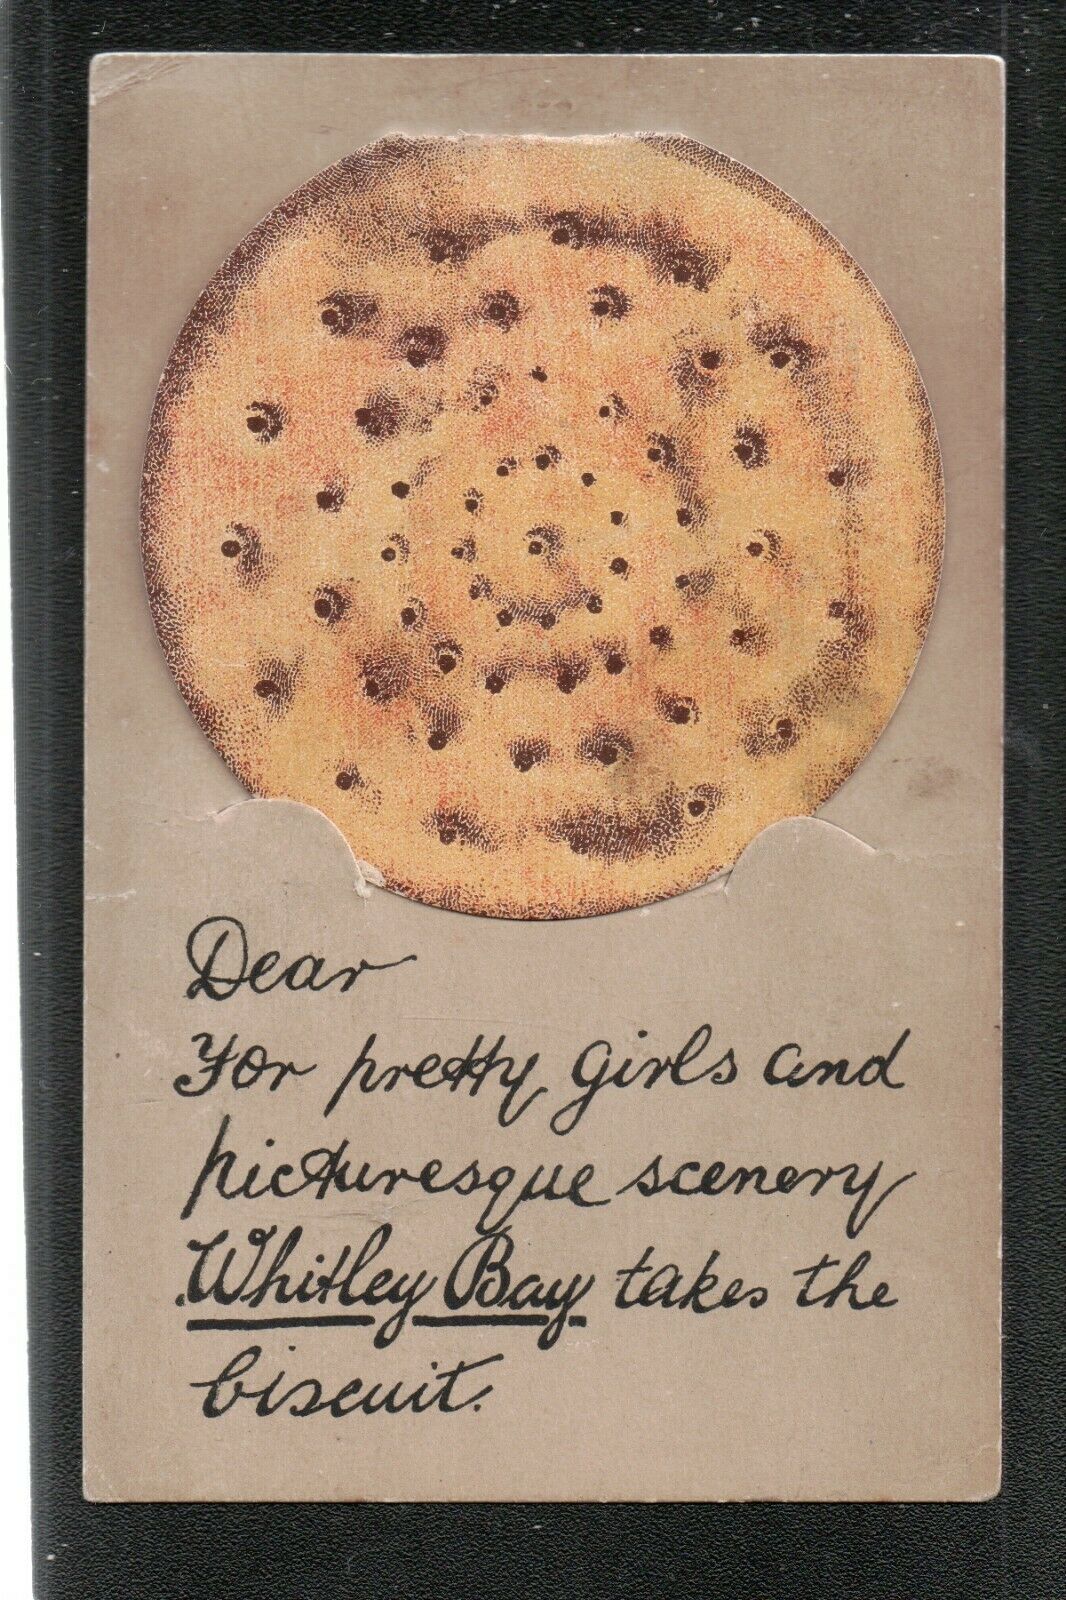 House Clearance - For Pretty Girls.. WHITLEY BAY Takes The Biscuit 1909 ? Mailing Novelty Service